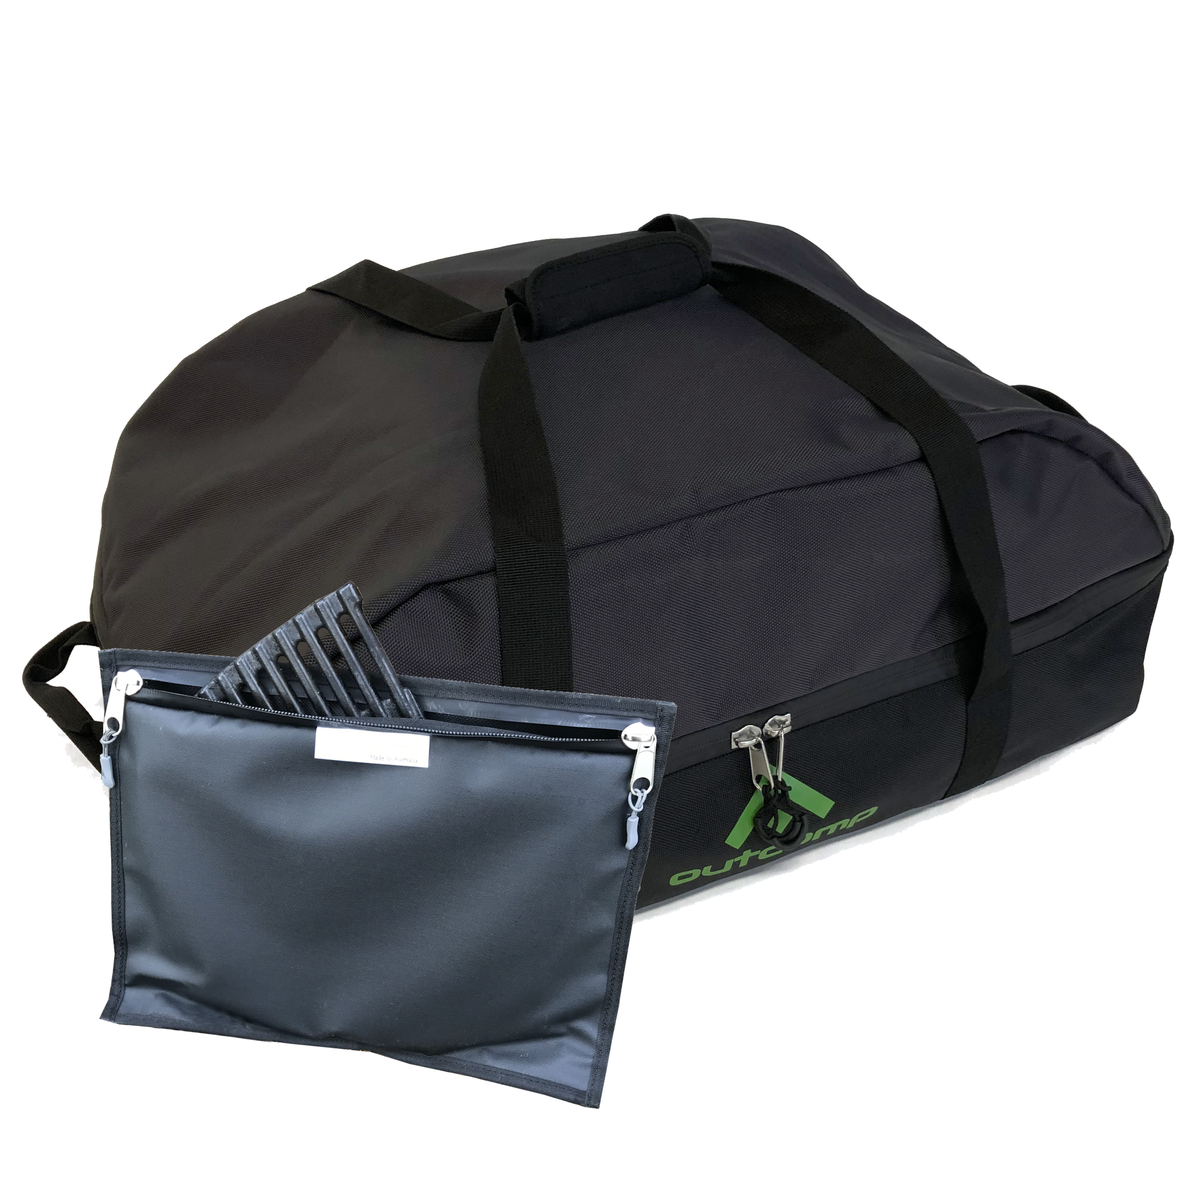 BBQ carry bag with optional BBQ plate storage